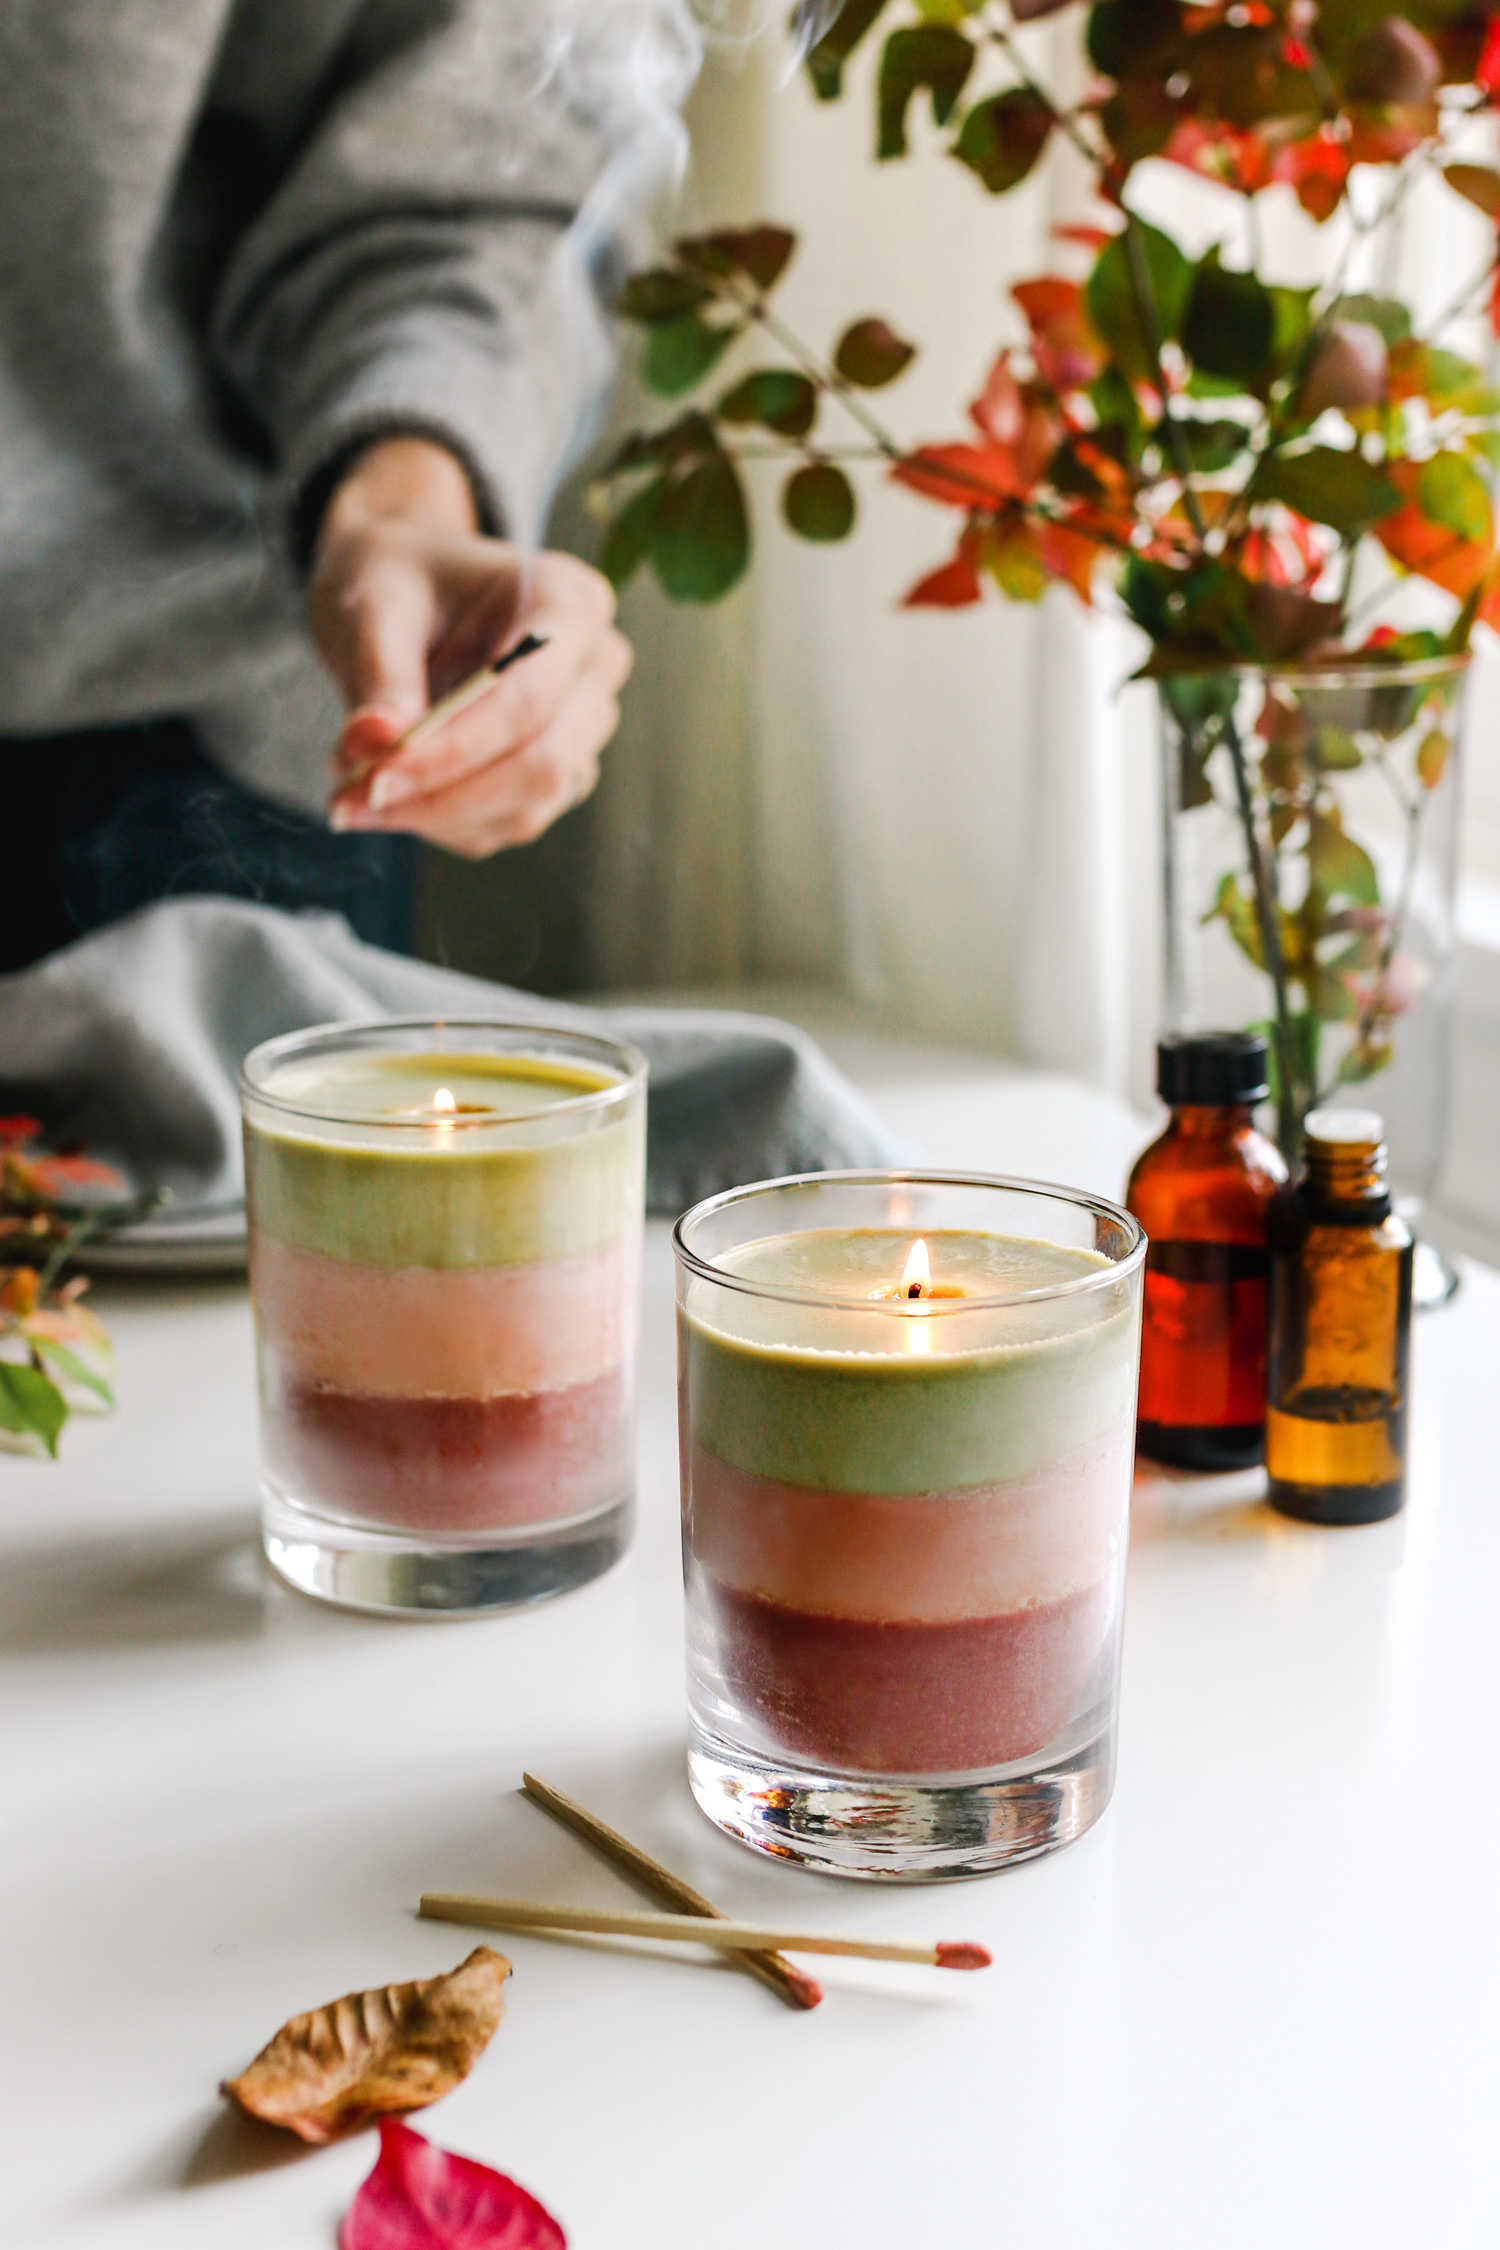 Just a few simple ingredients make up these cute, gift-worthy DIY holiday candles, layered with holiday colors and scents.